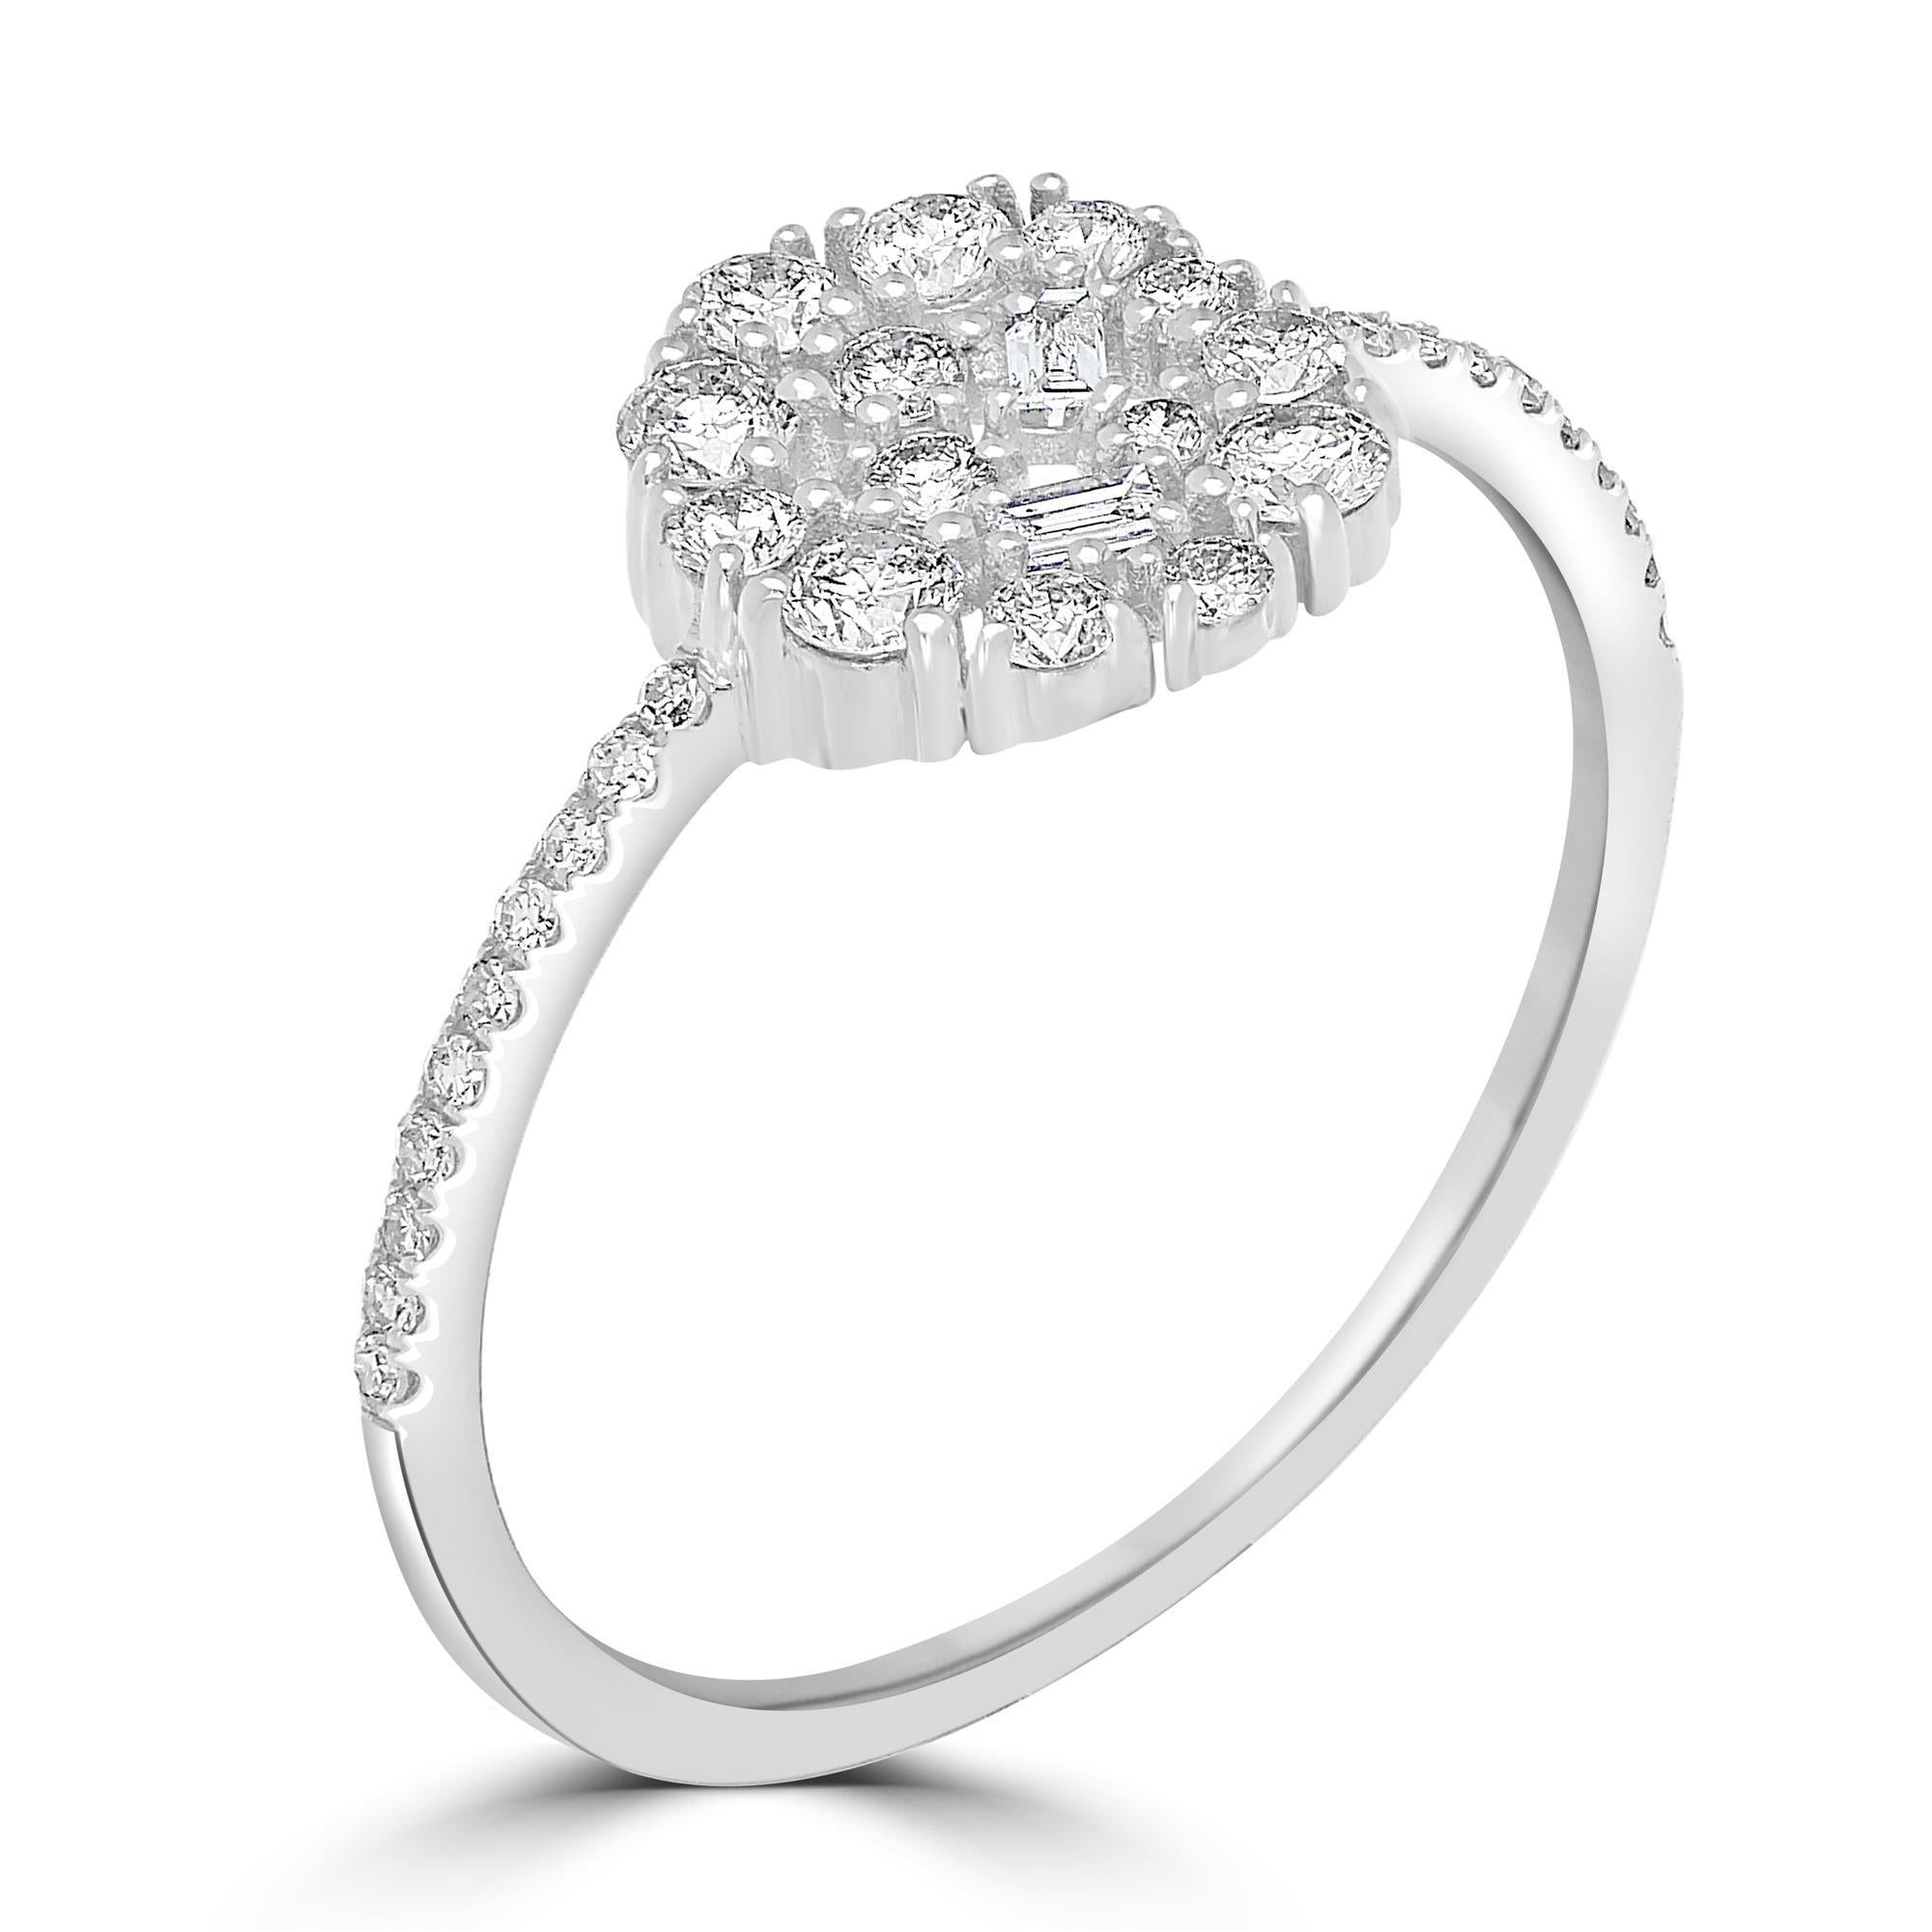 For Sale:  Luxle 3/8 Carat T.W. Diamond Cluster Ring in 14k White Gold 2